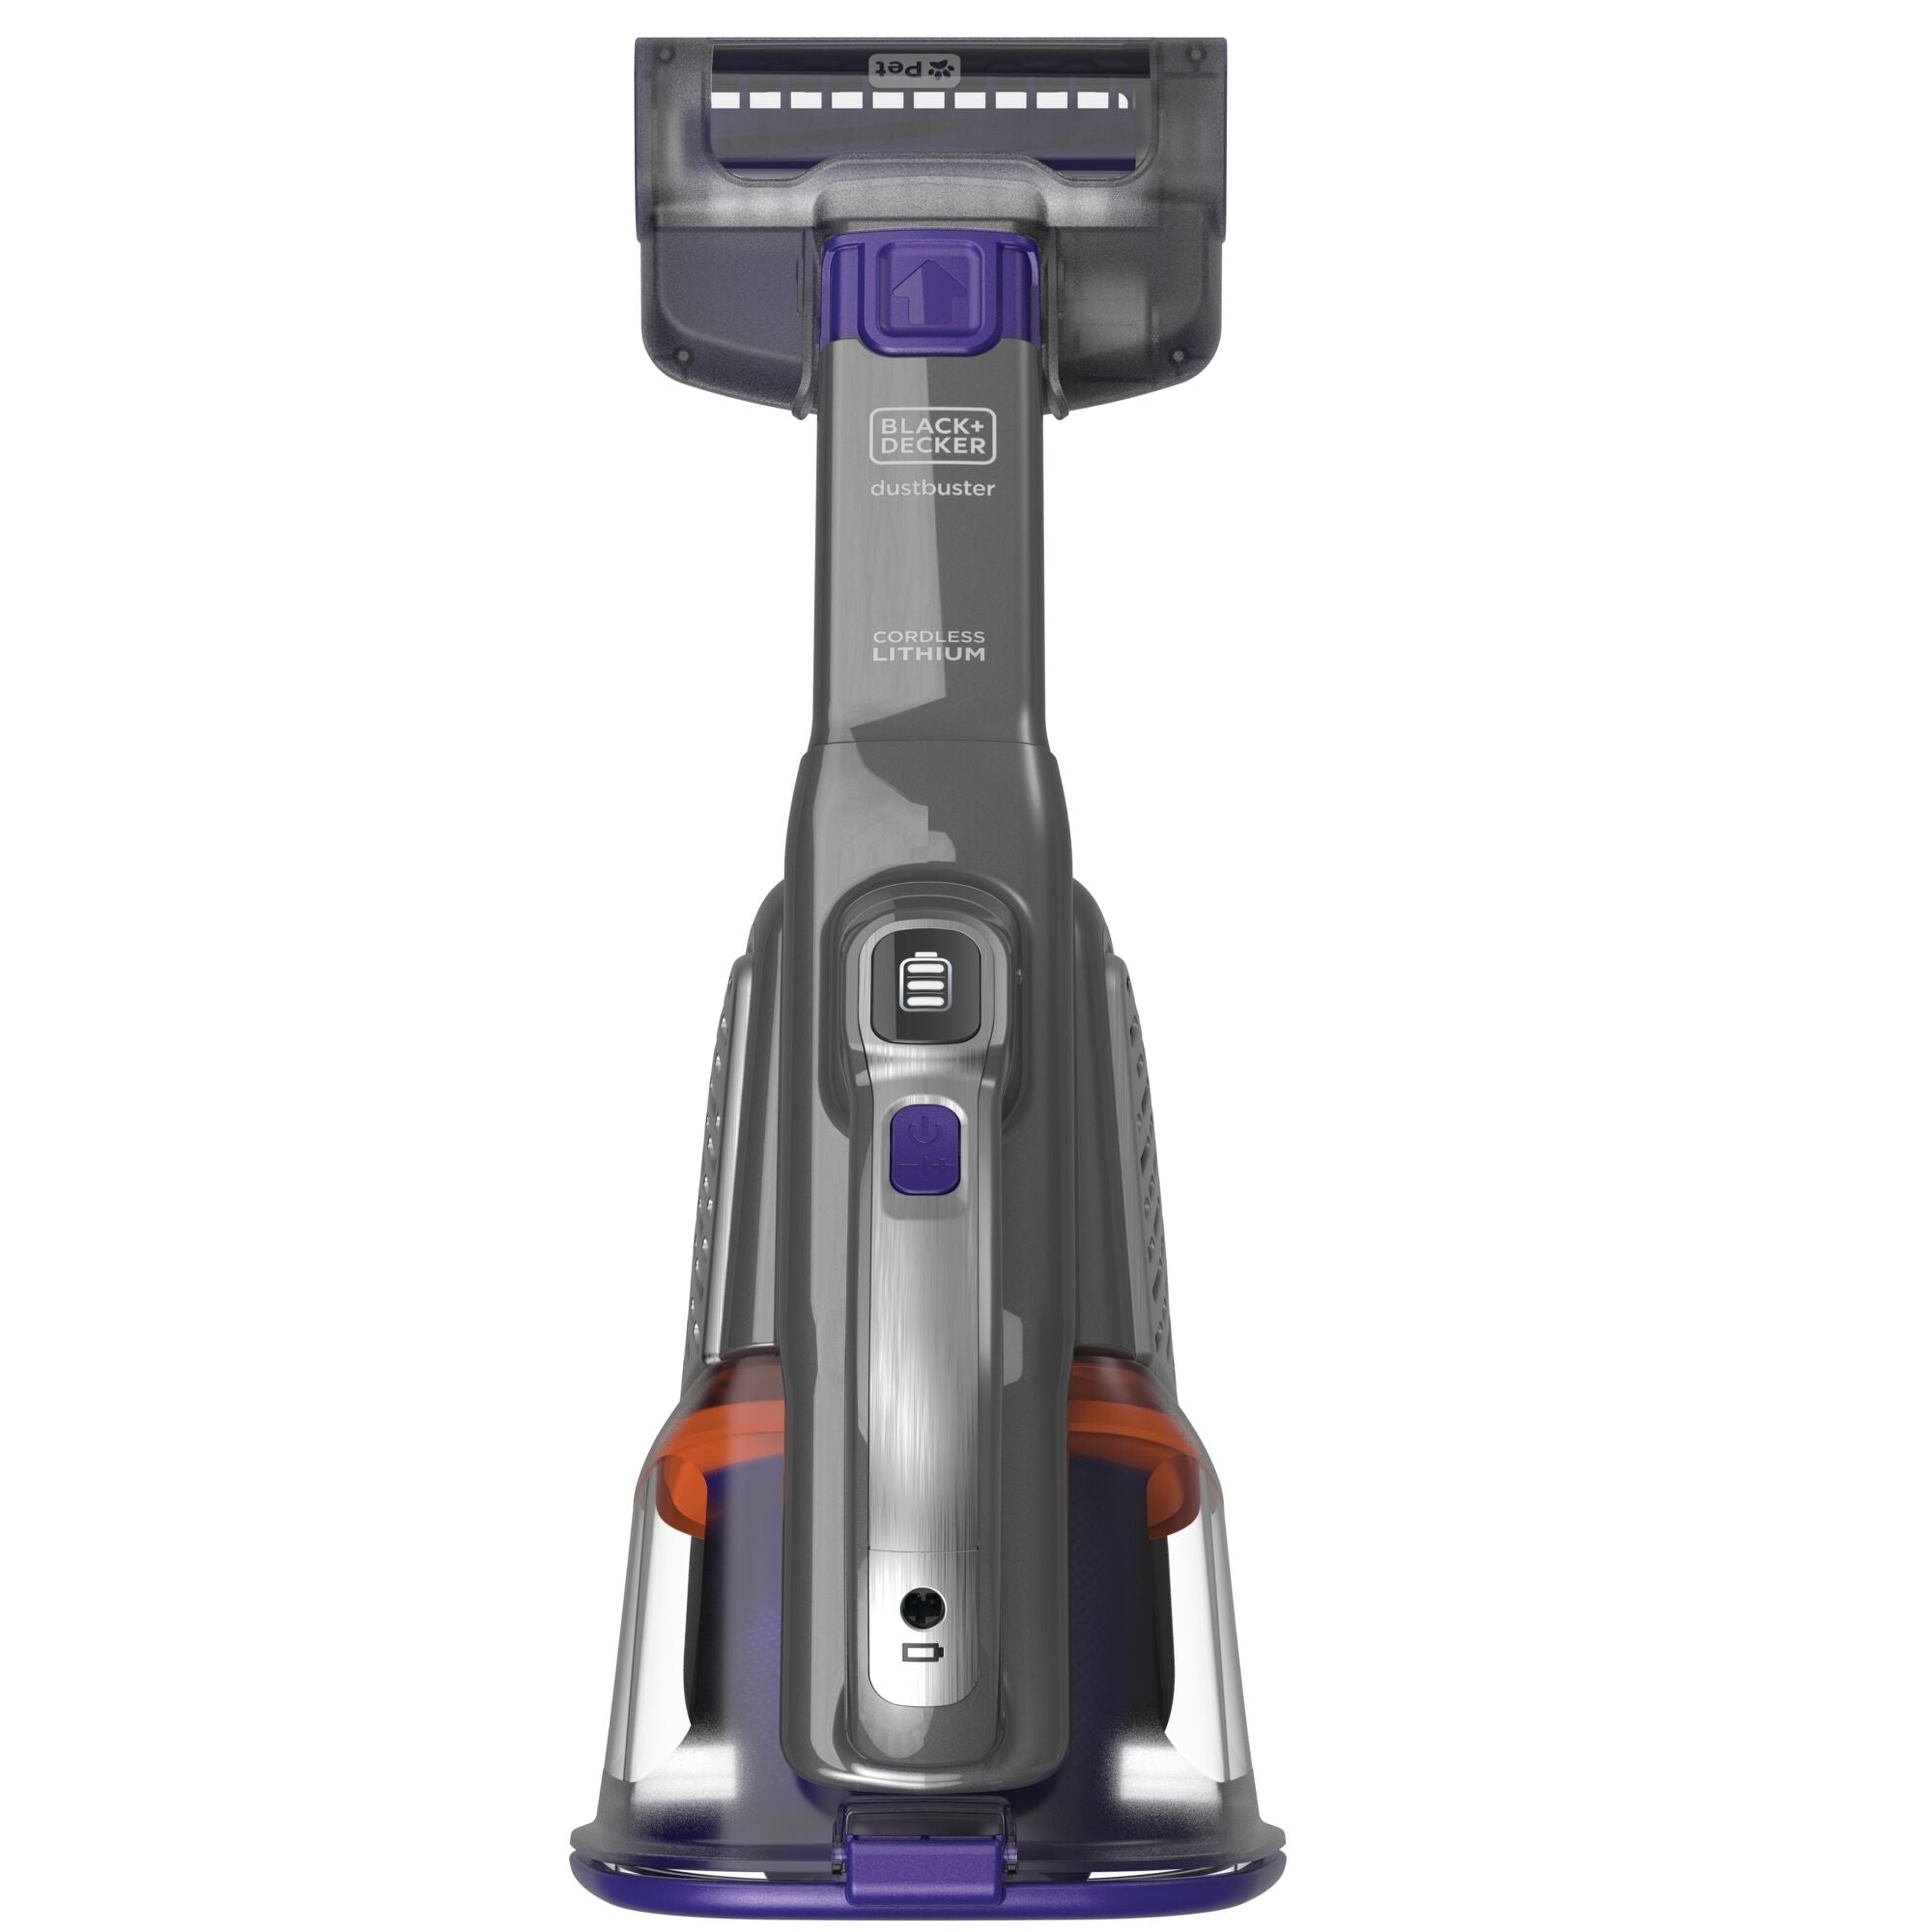 Dustbuster Advanced Clean plus Pet Cordless Hand Vacuum being used to clean pet hair from sofa.